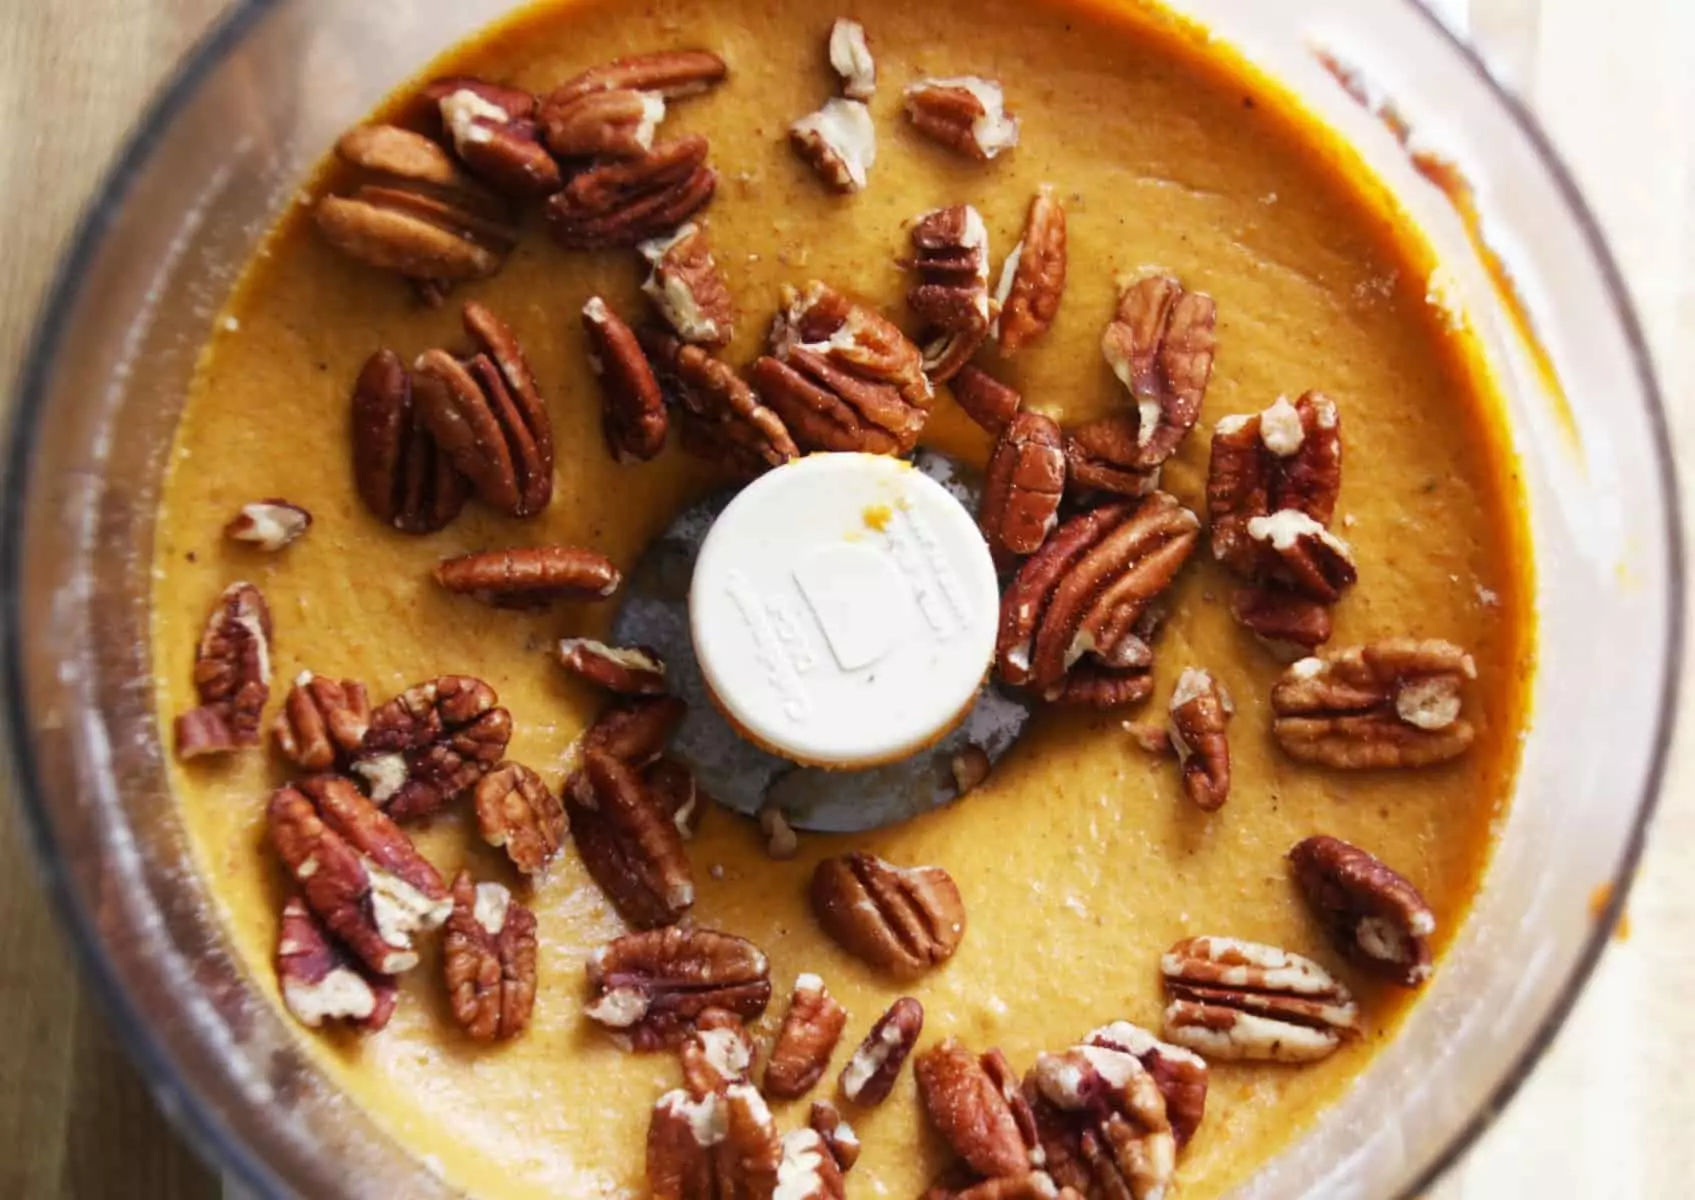 Food processor with batter and pecans.